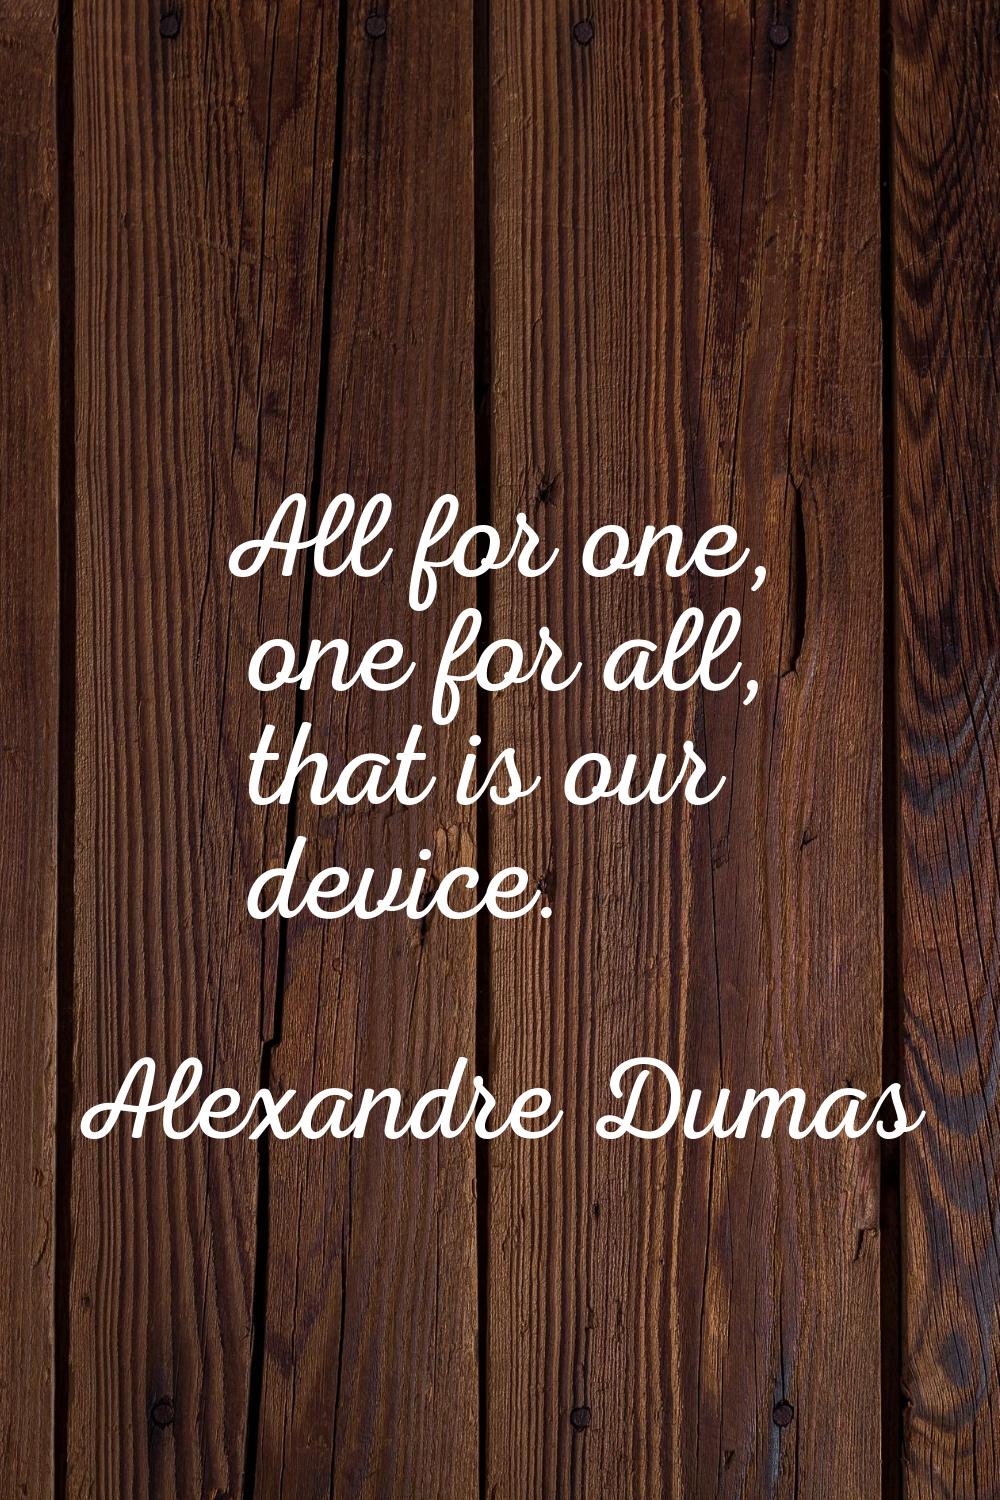 All for one, one for all, that is our device.